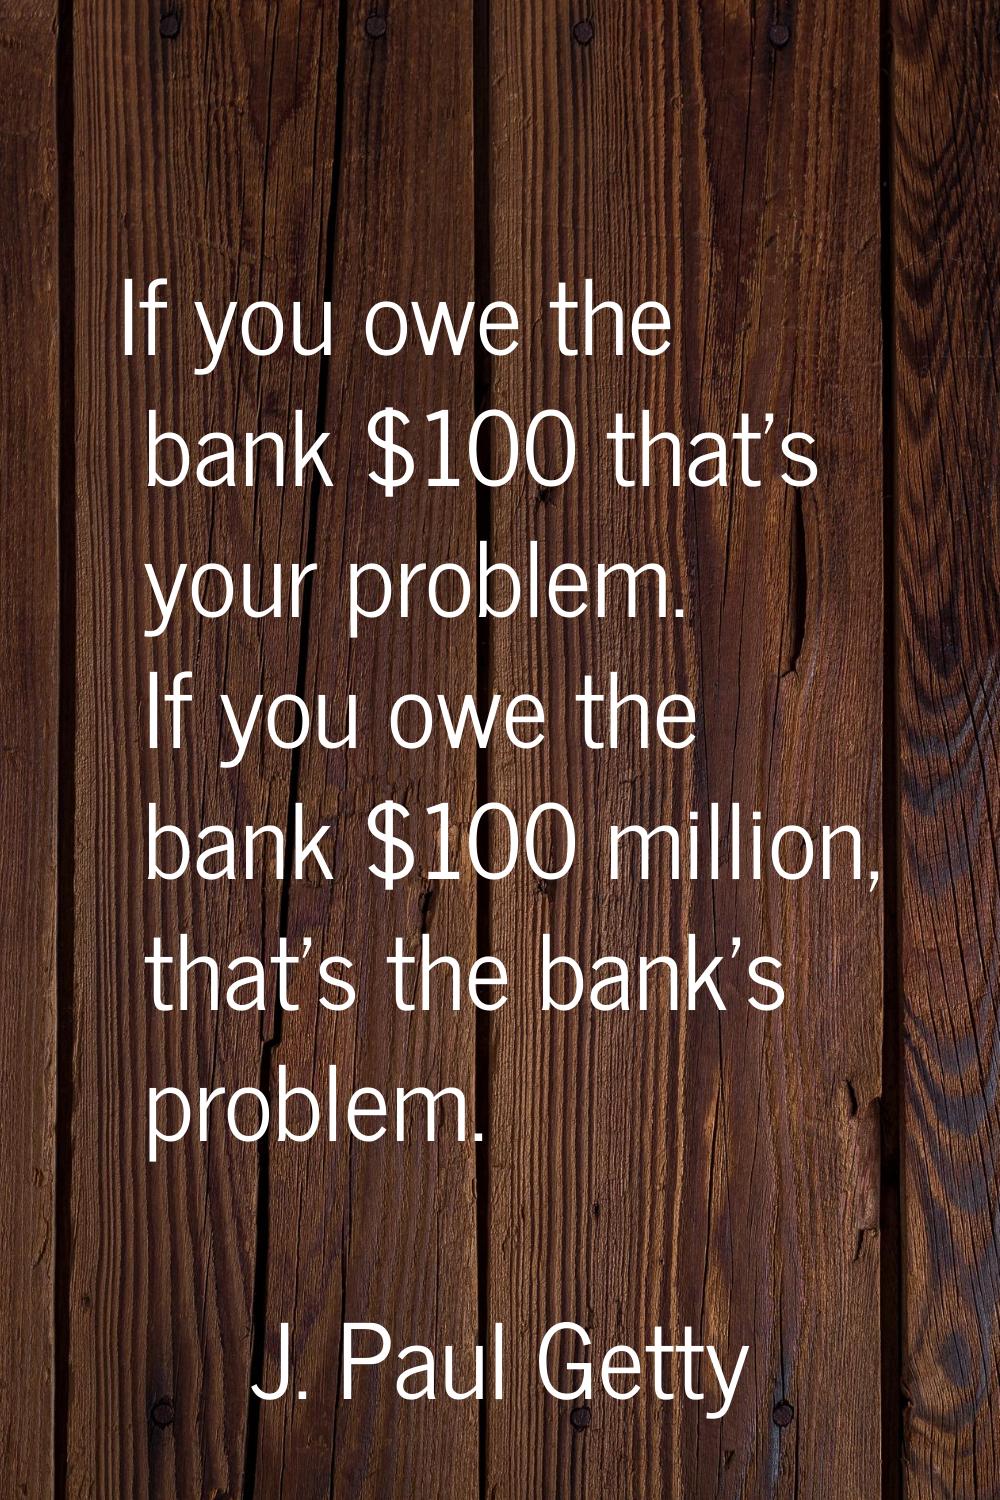 If you owe the bank $100 that's your problem. If you owe the bank $100 million, that's the bank's p